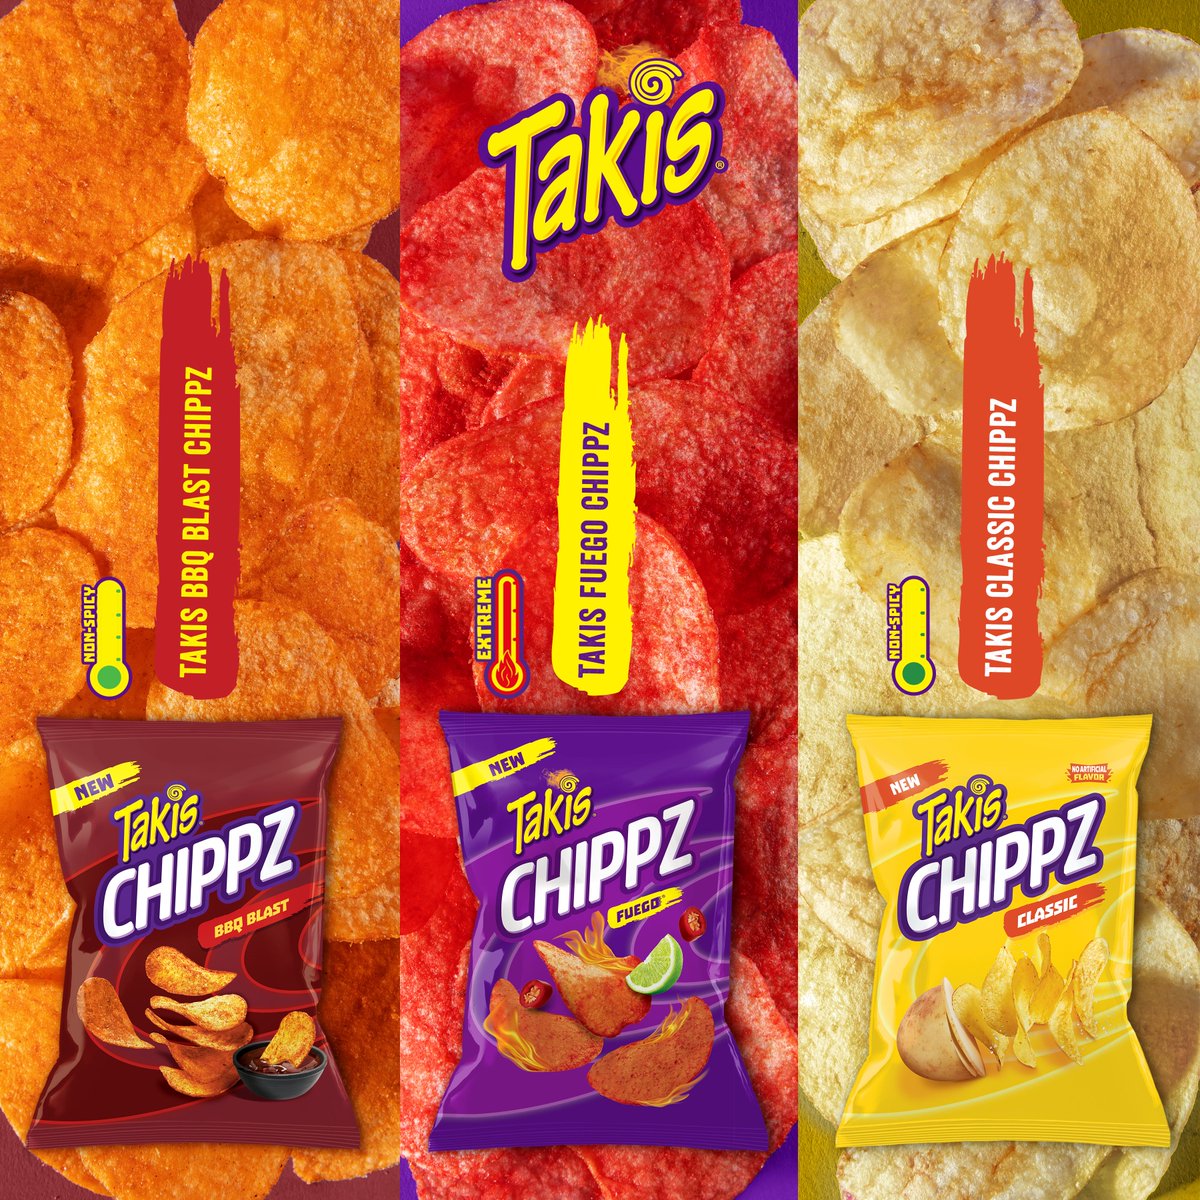 We’ve added two new members to the Takis Chippz Family: BBQ Blast and Classic 😋 Tag someone who hasn’t tried these! #Takis #TakisChippz #BBQ #Fuego